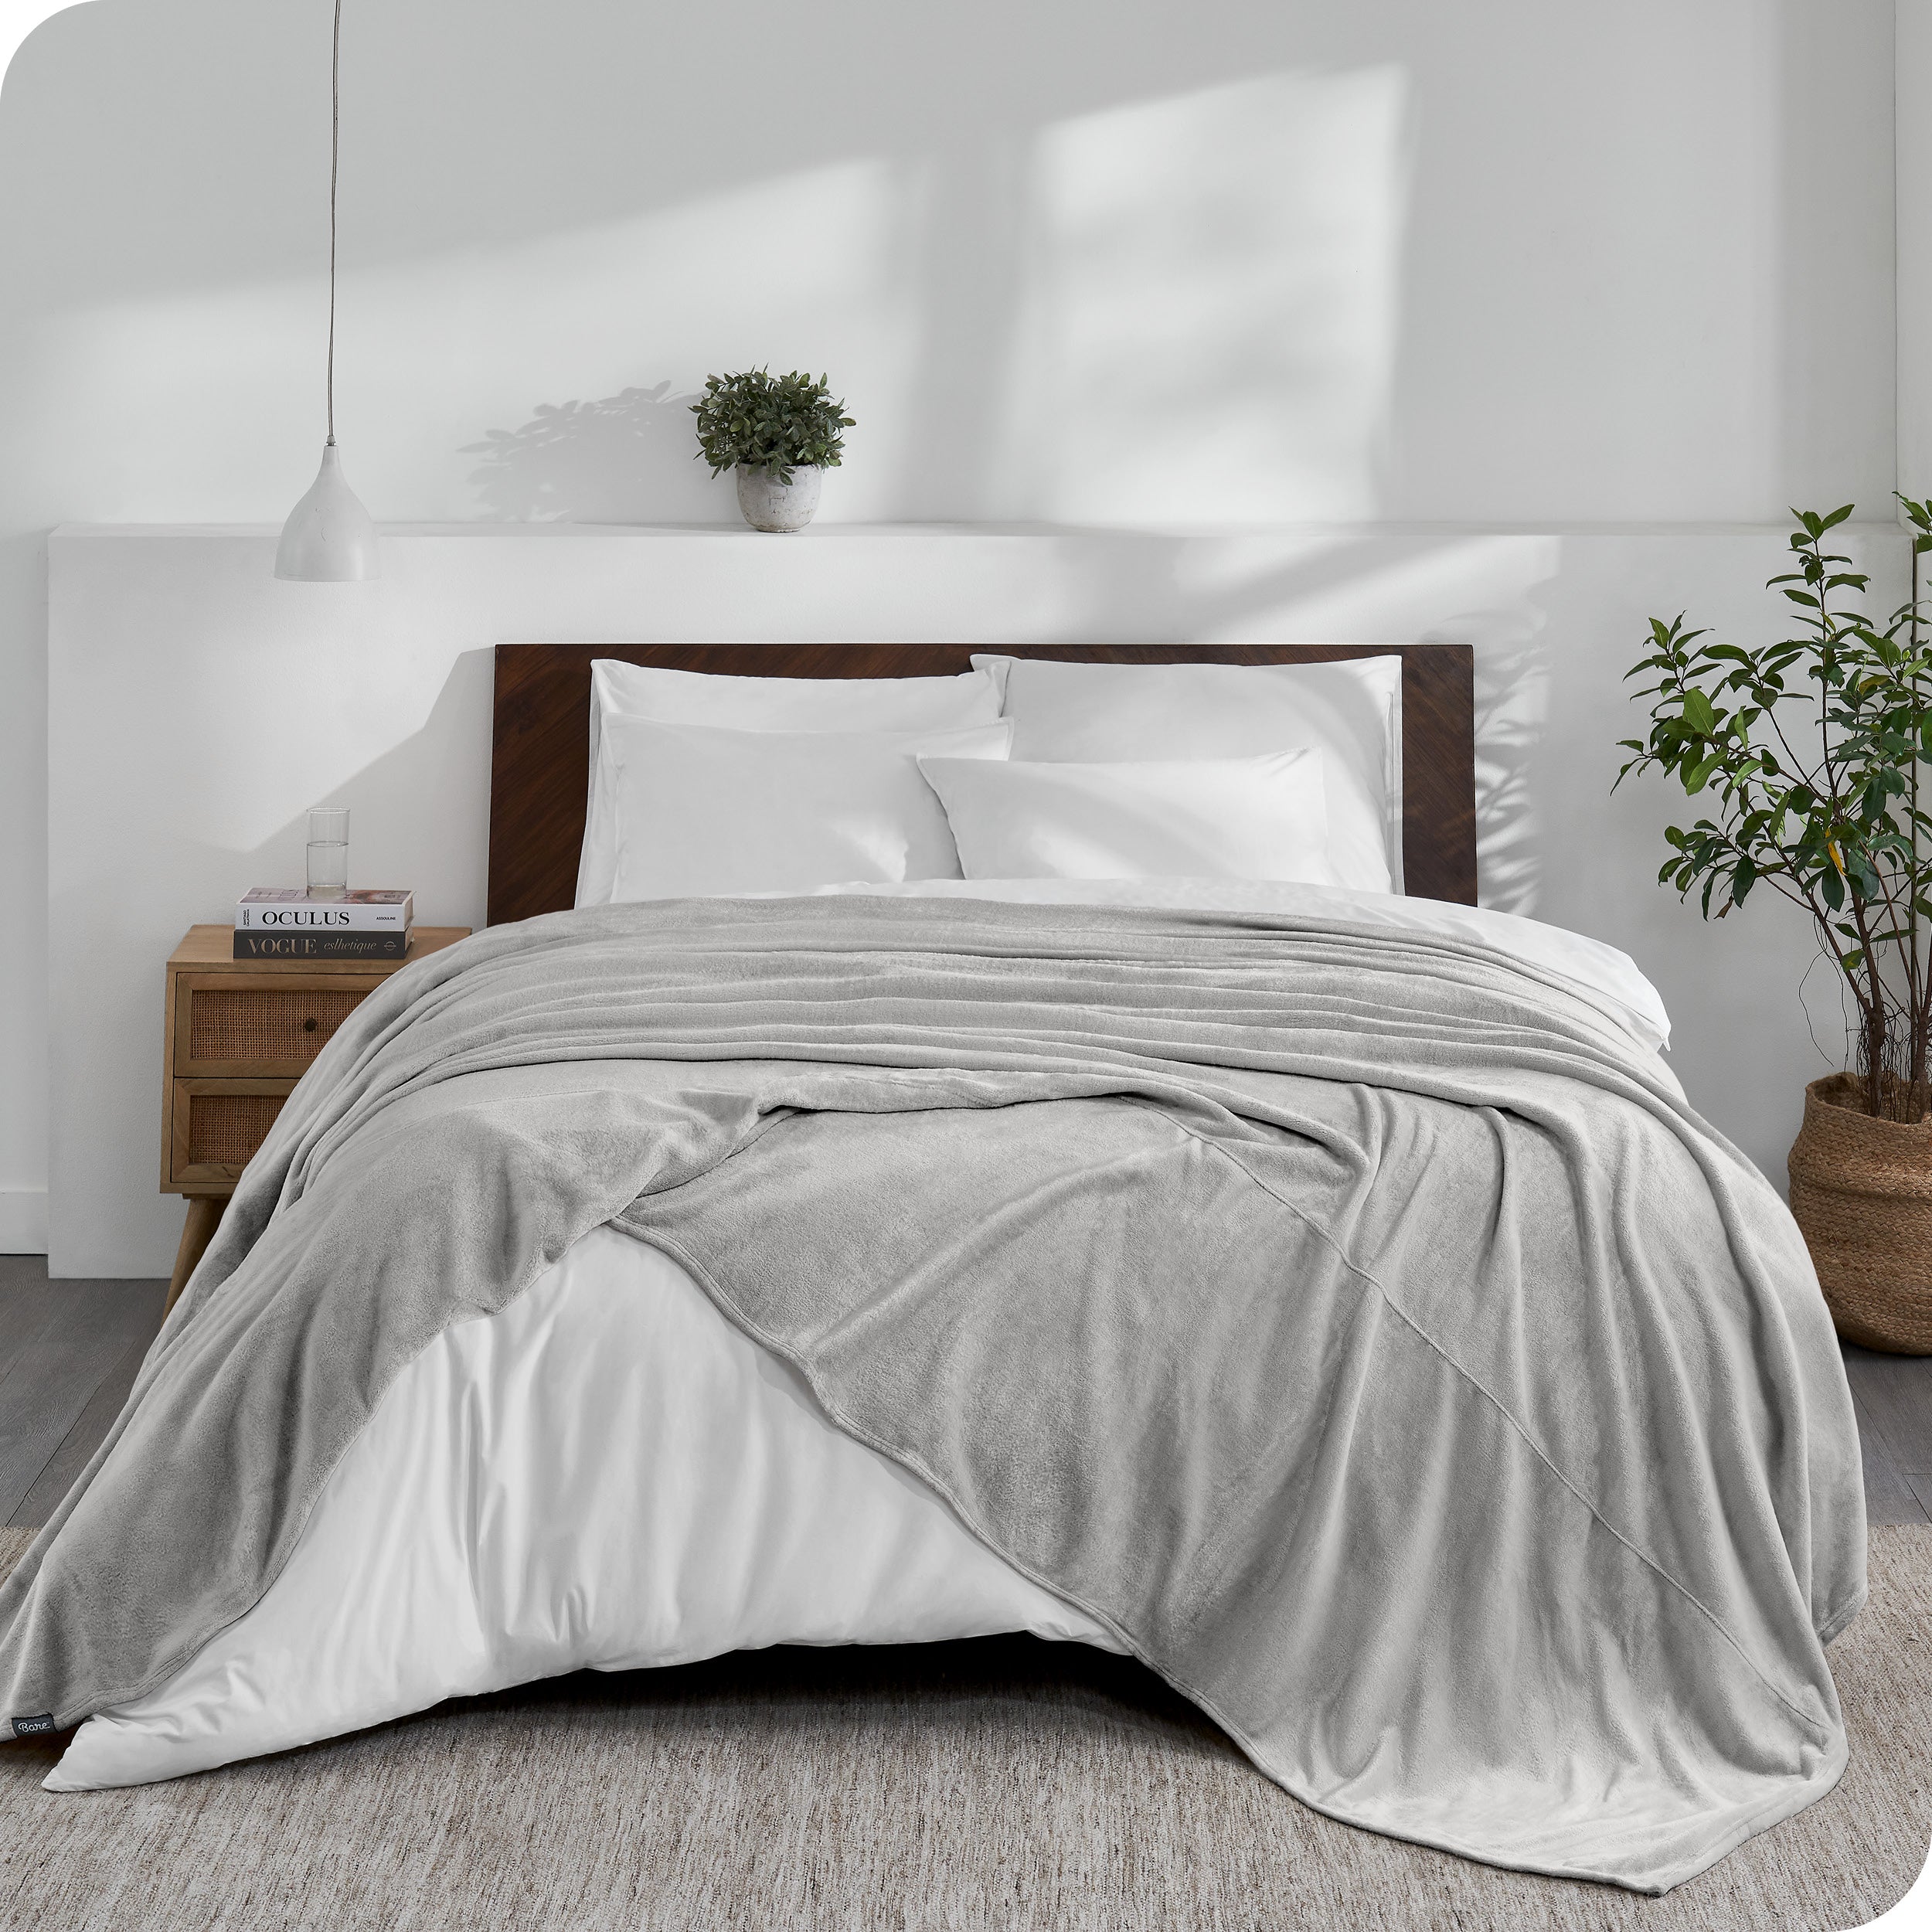 An oversized blanket on a bed made with all white bedding